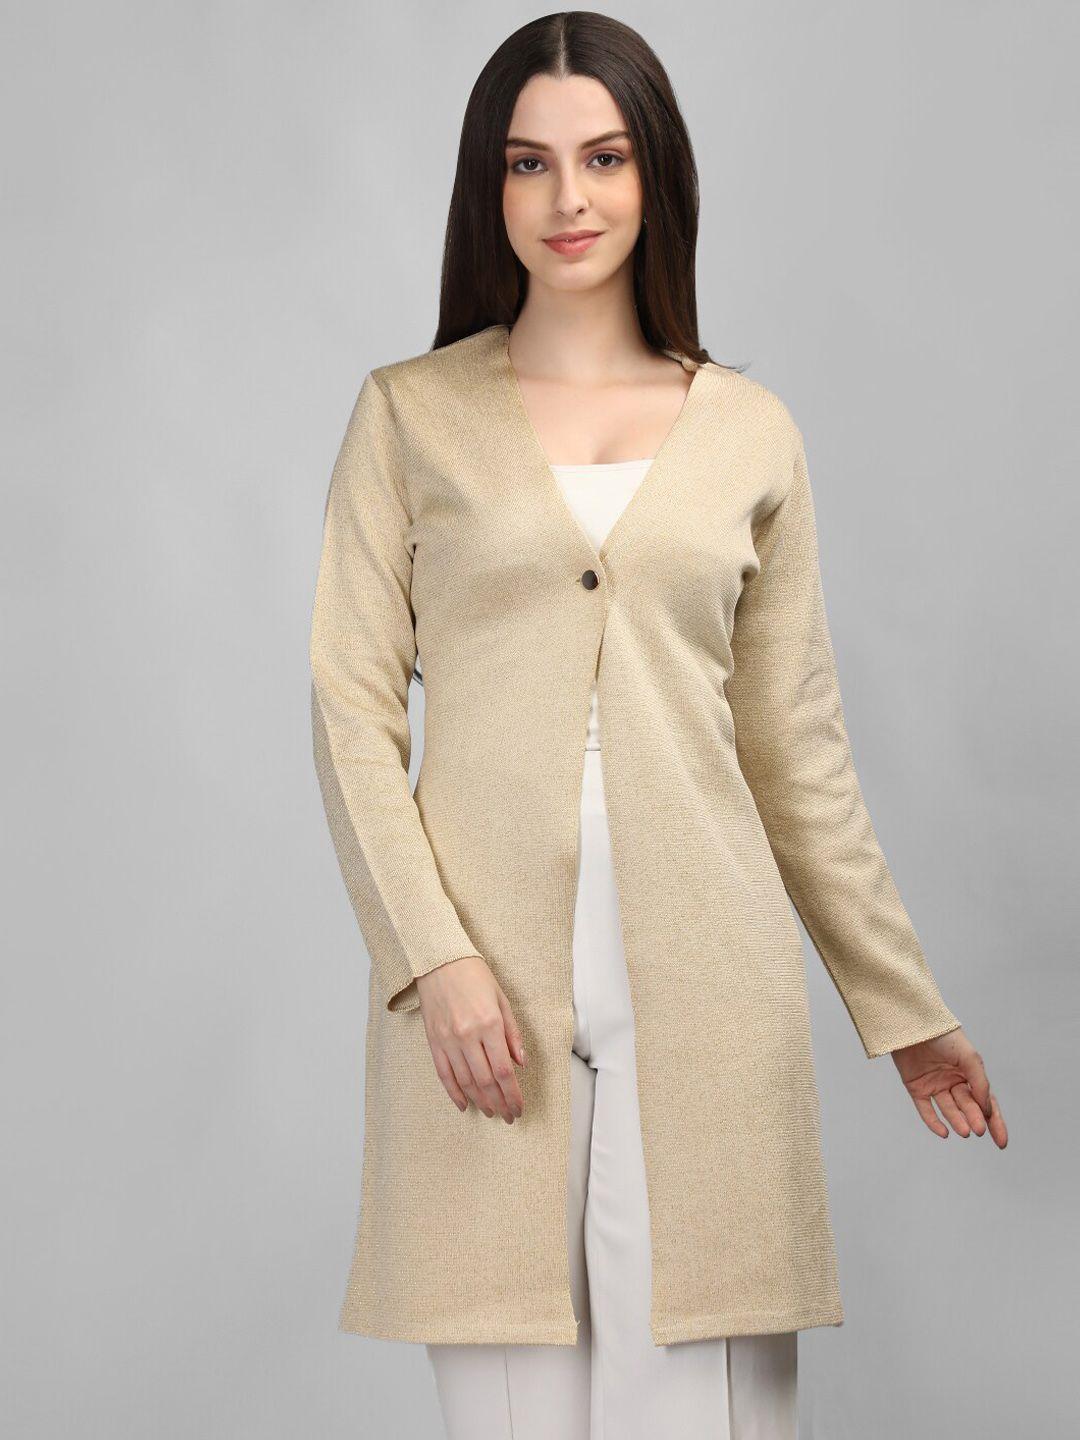 mikhad long sleeves longline buttoned shrug